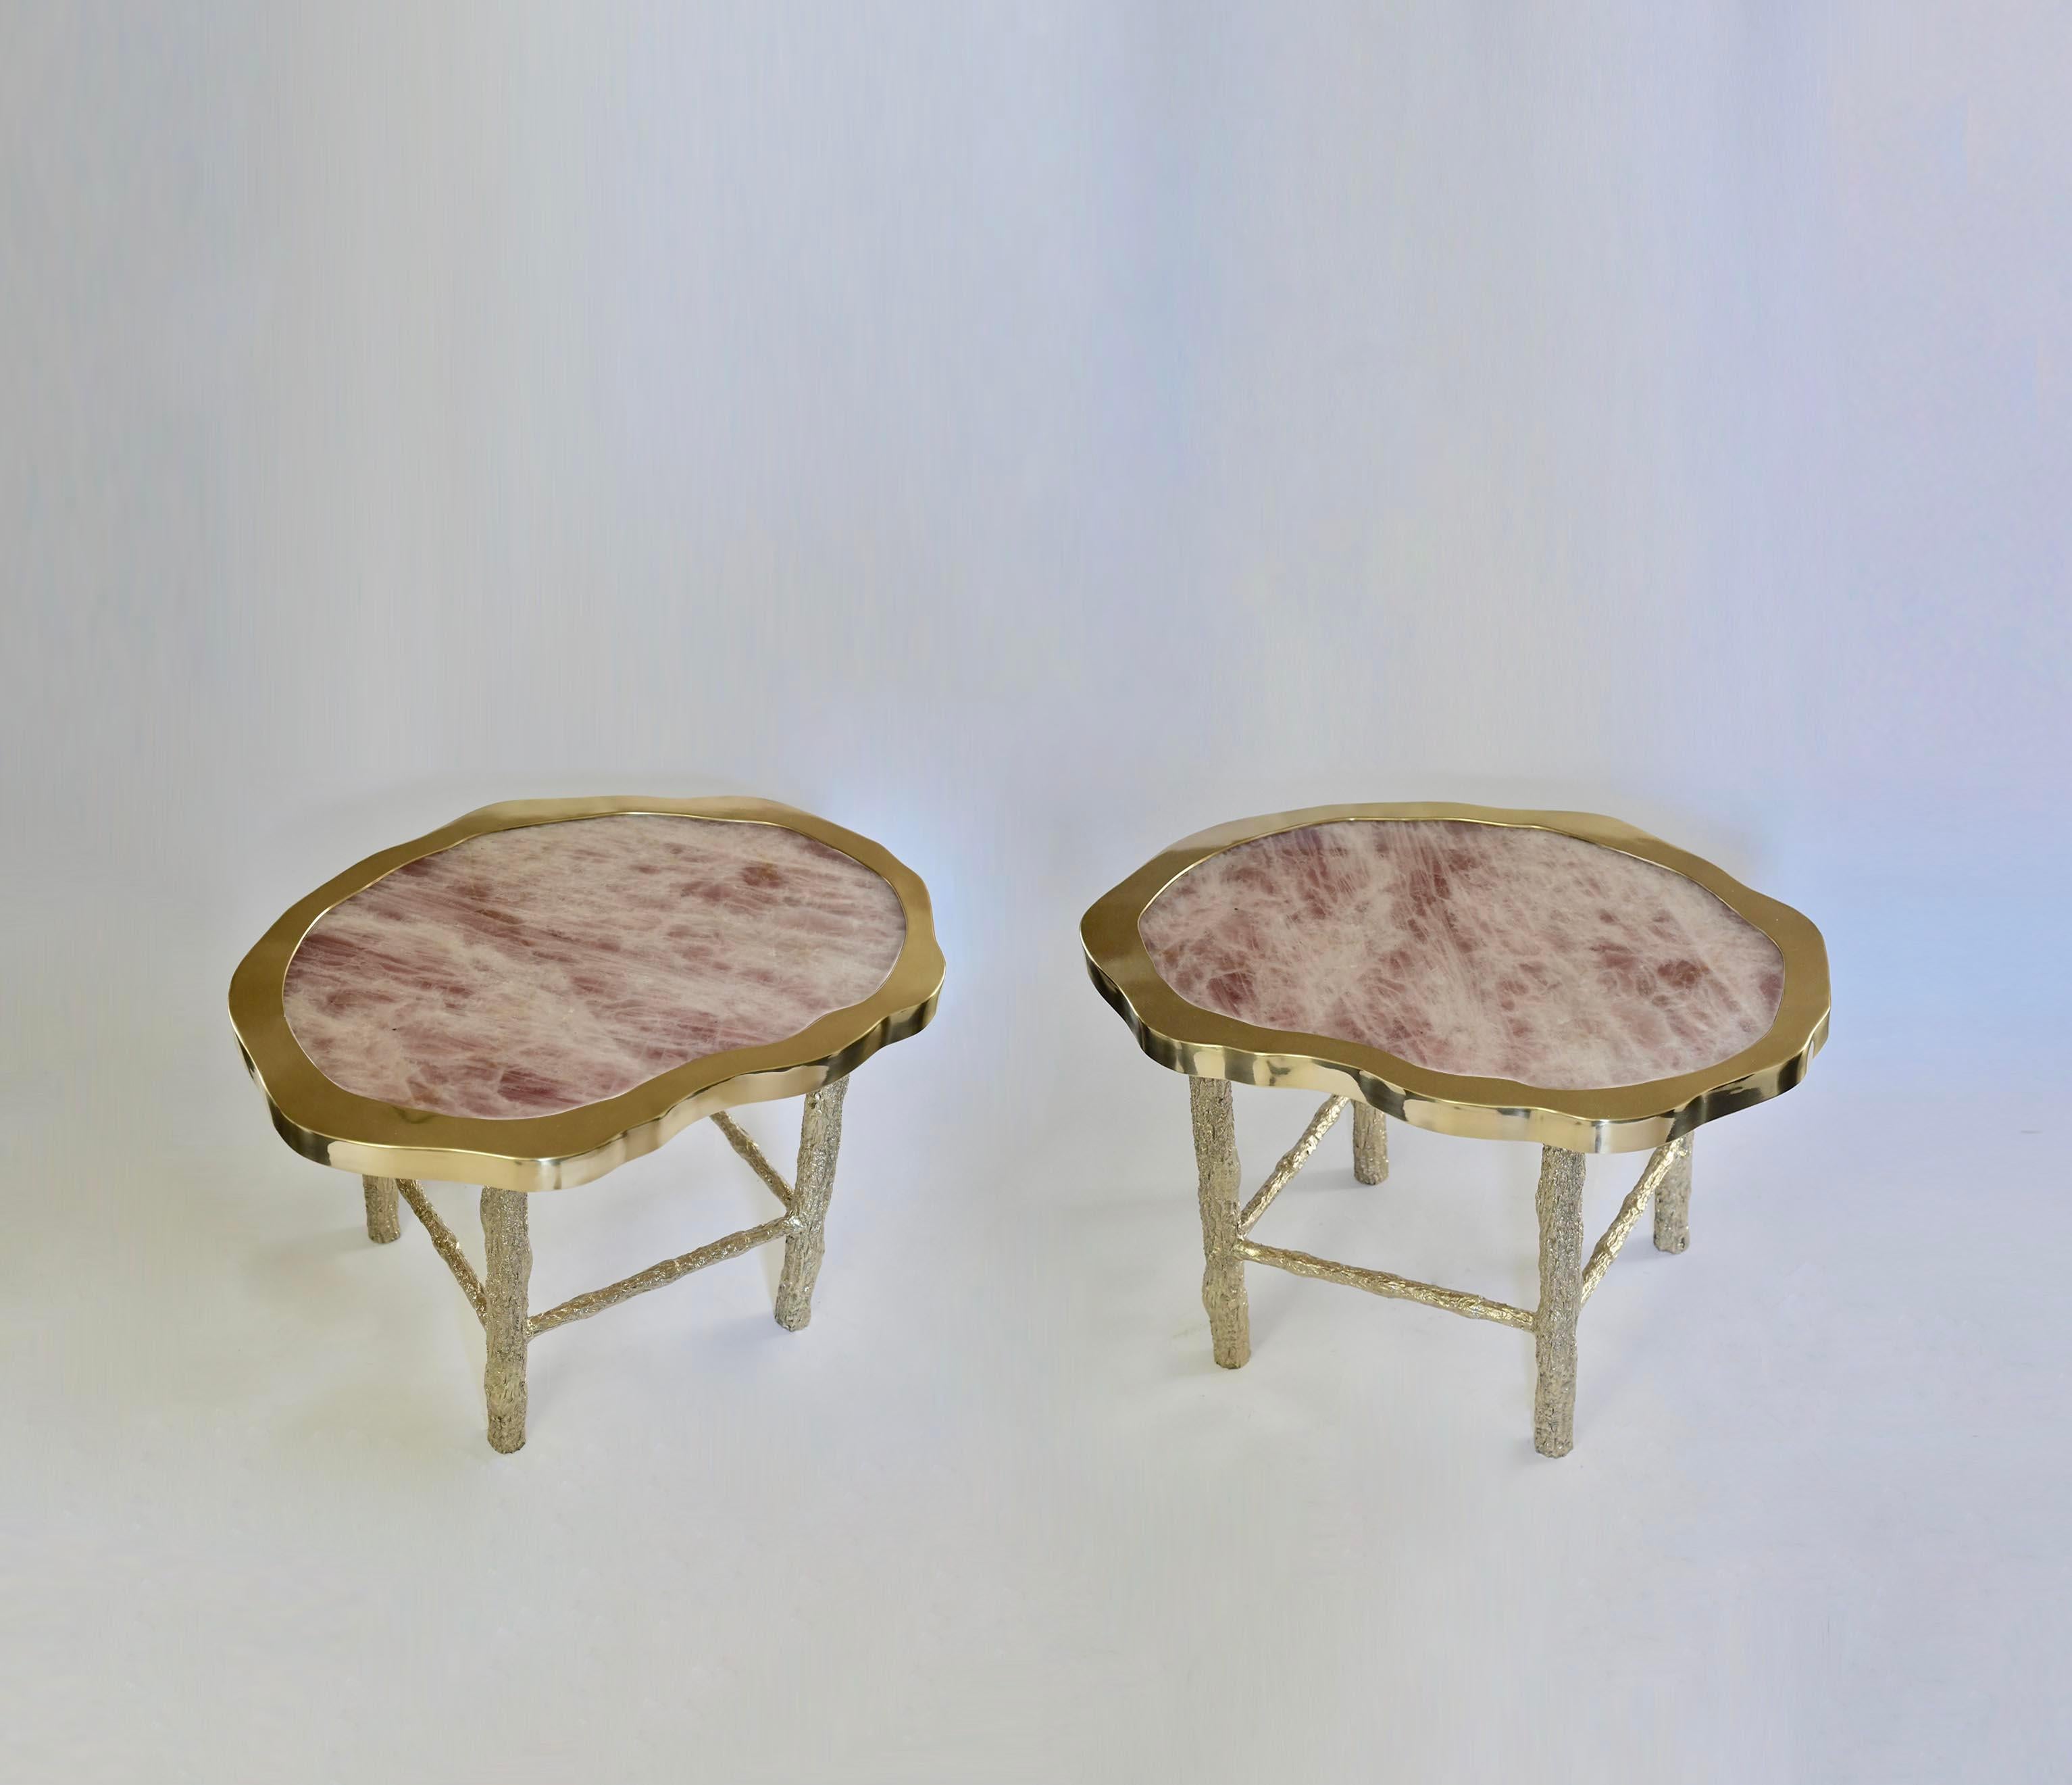 Pair of rose quartz rock crystal cocktail tables with twig inspired hammered brass legs, created by Phoenix Gallery.
Custom size upon request.